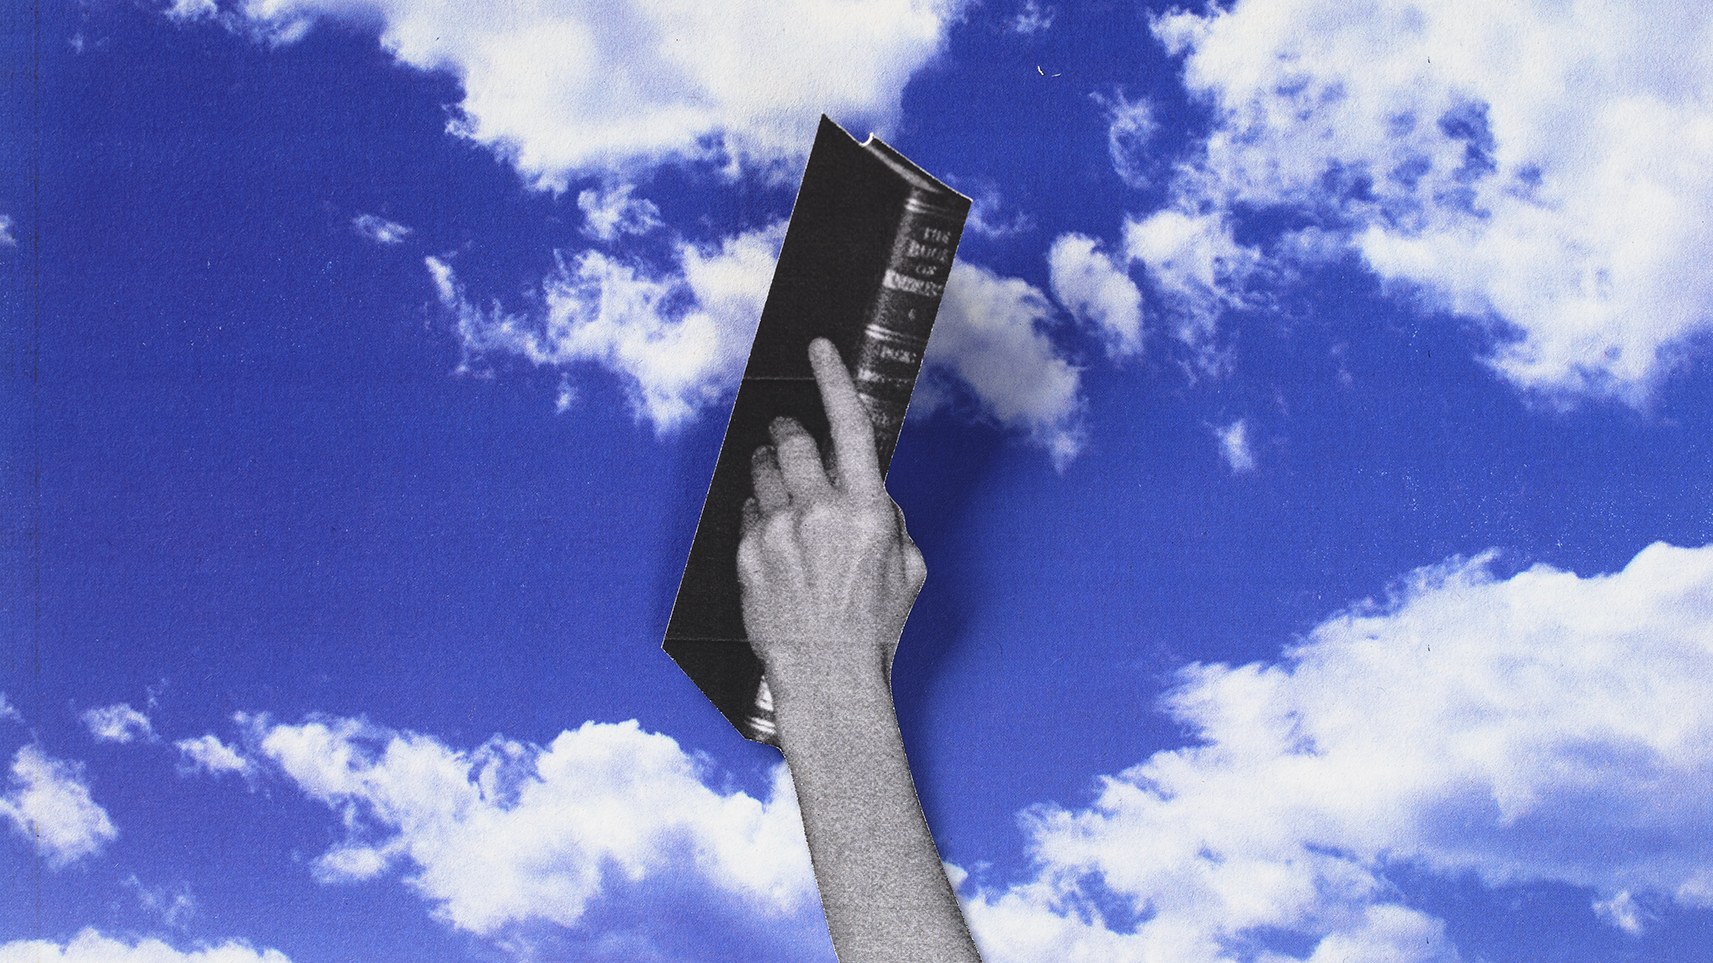 A hand holding a book, reaching up into a cloudy sky